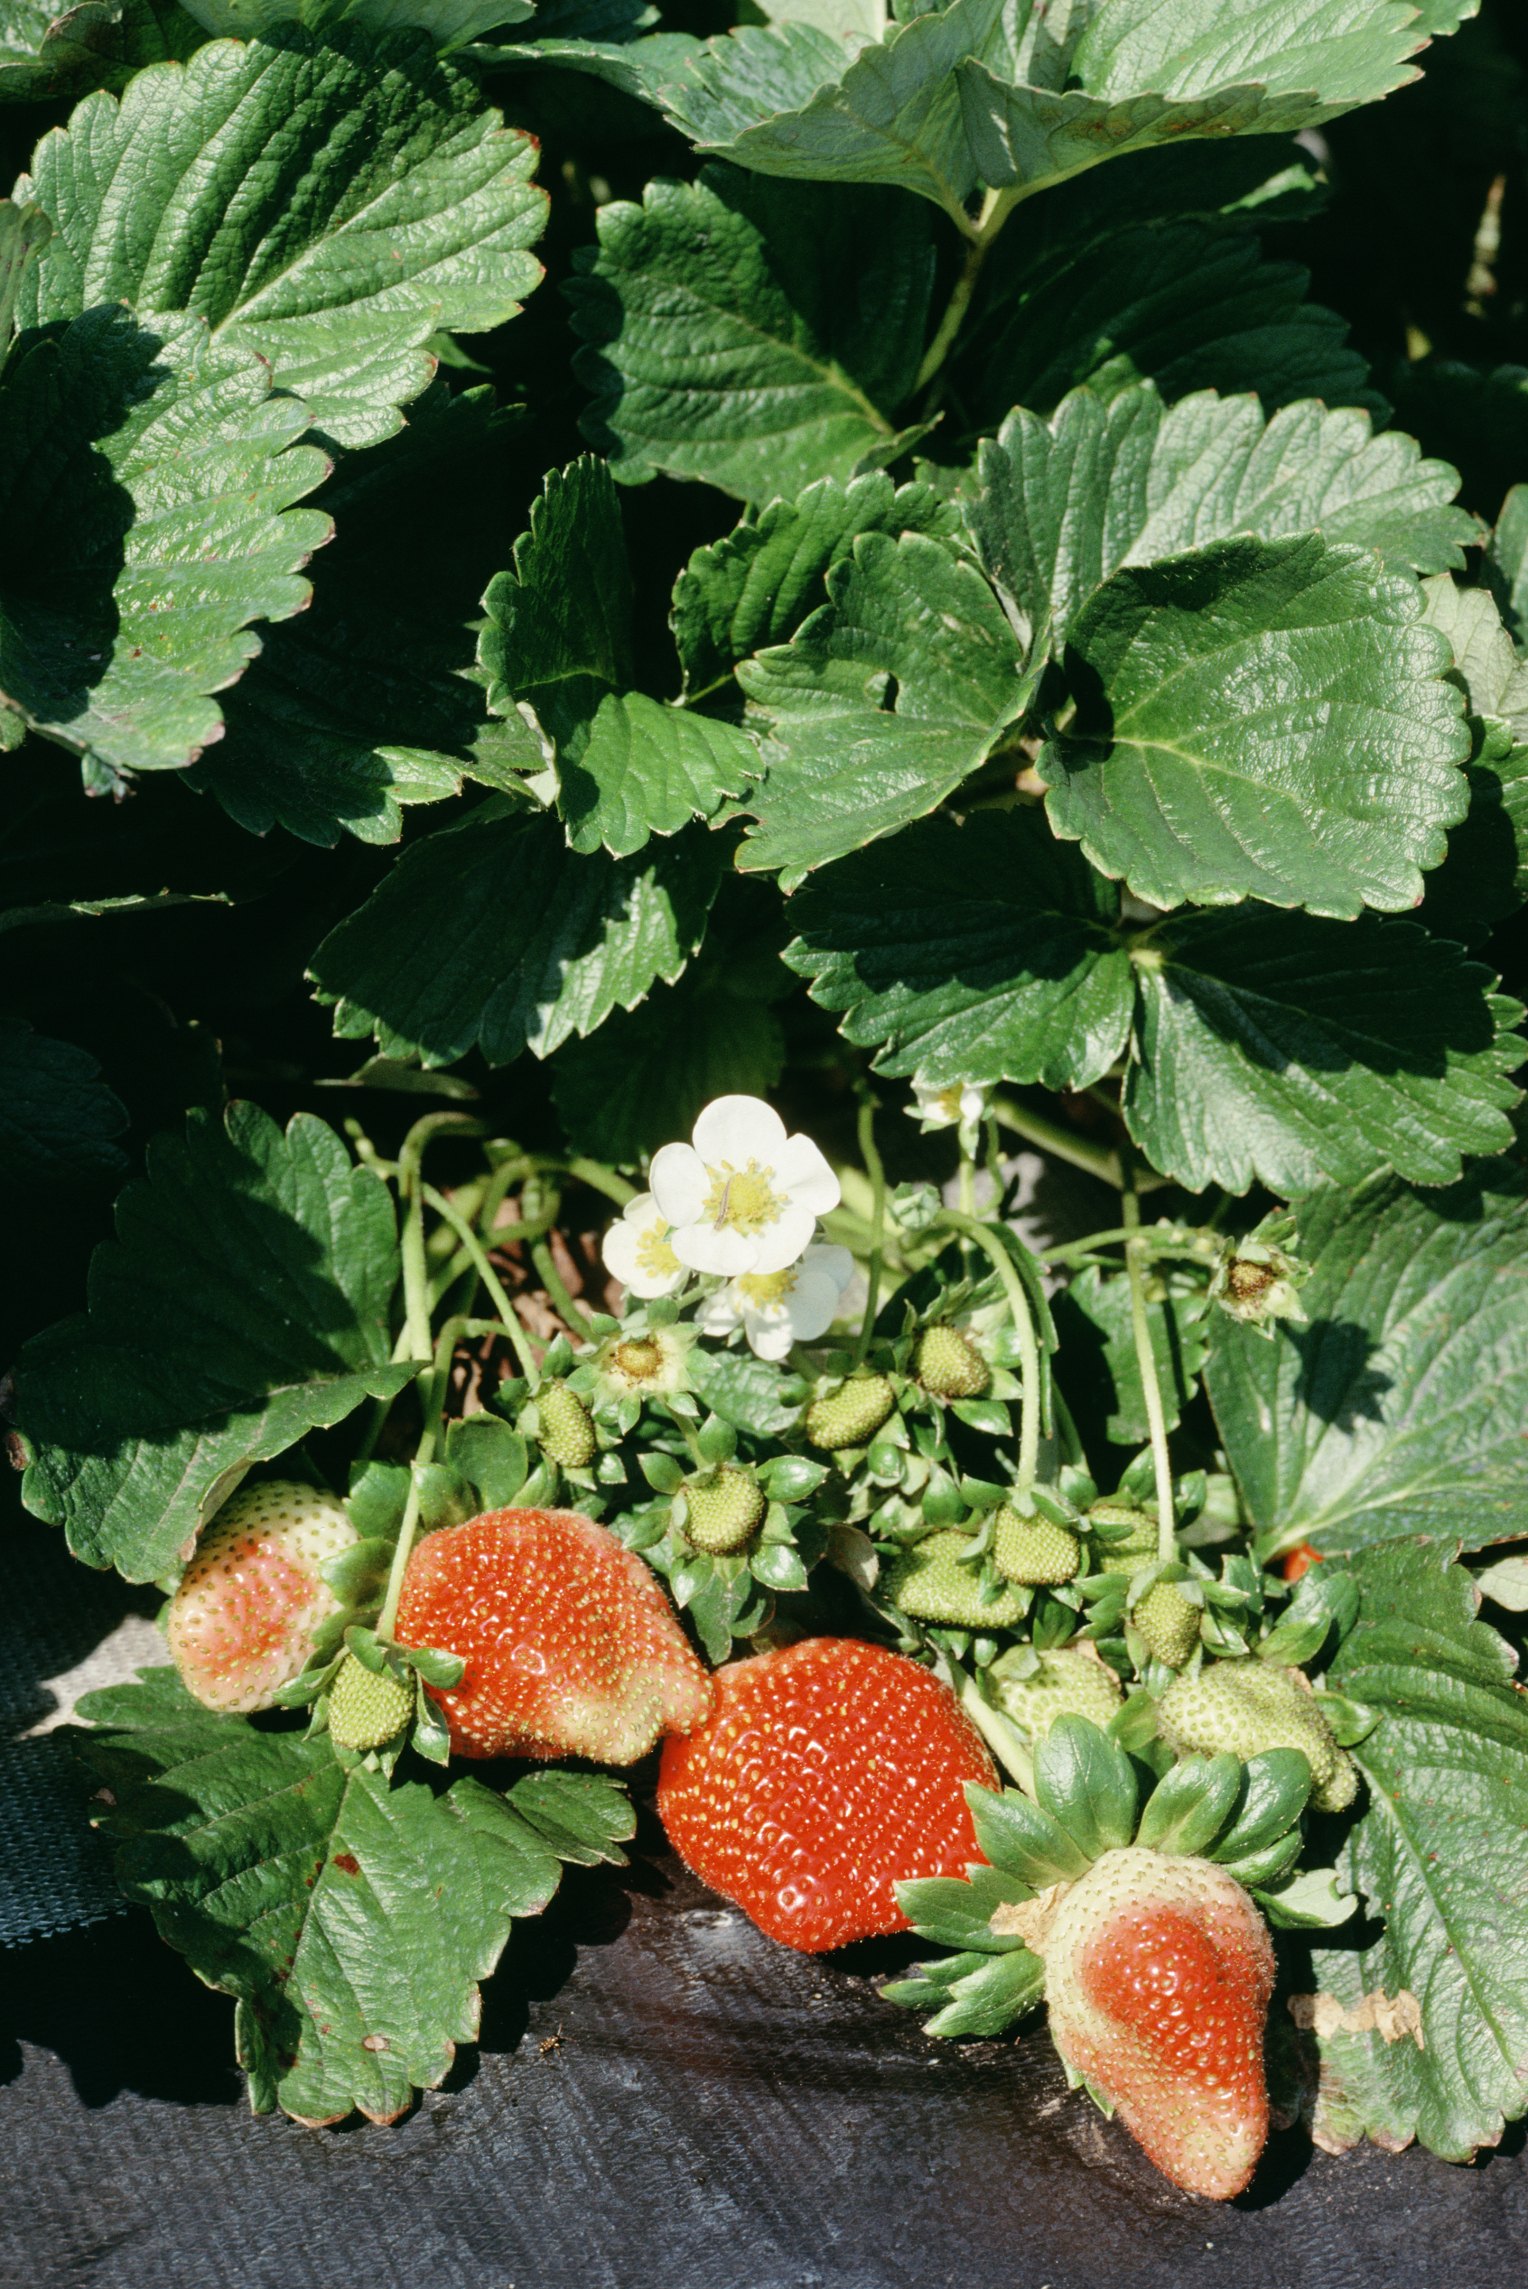 How to Stop Pill Bugs From Eating Strawberries eHow